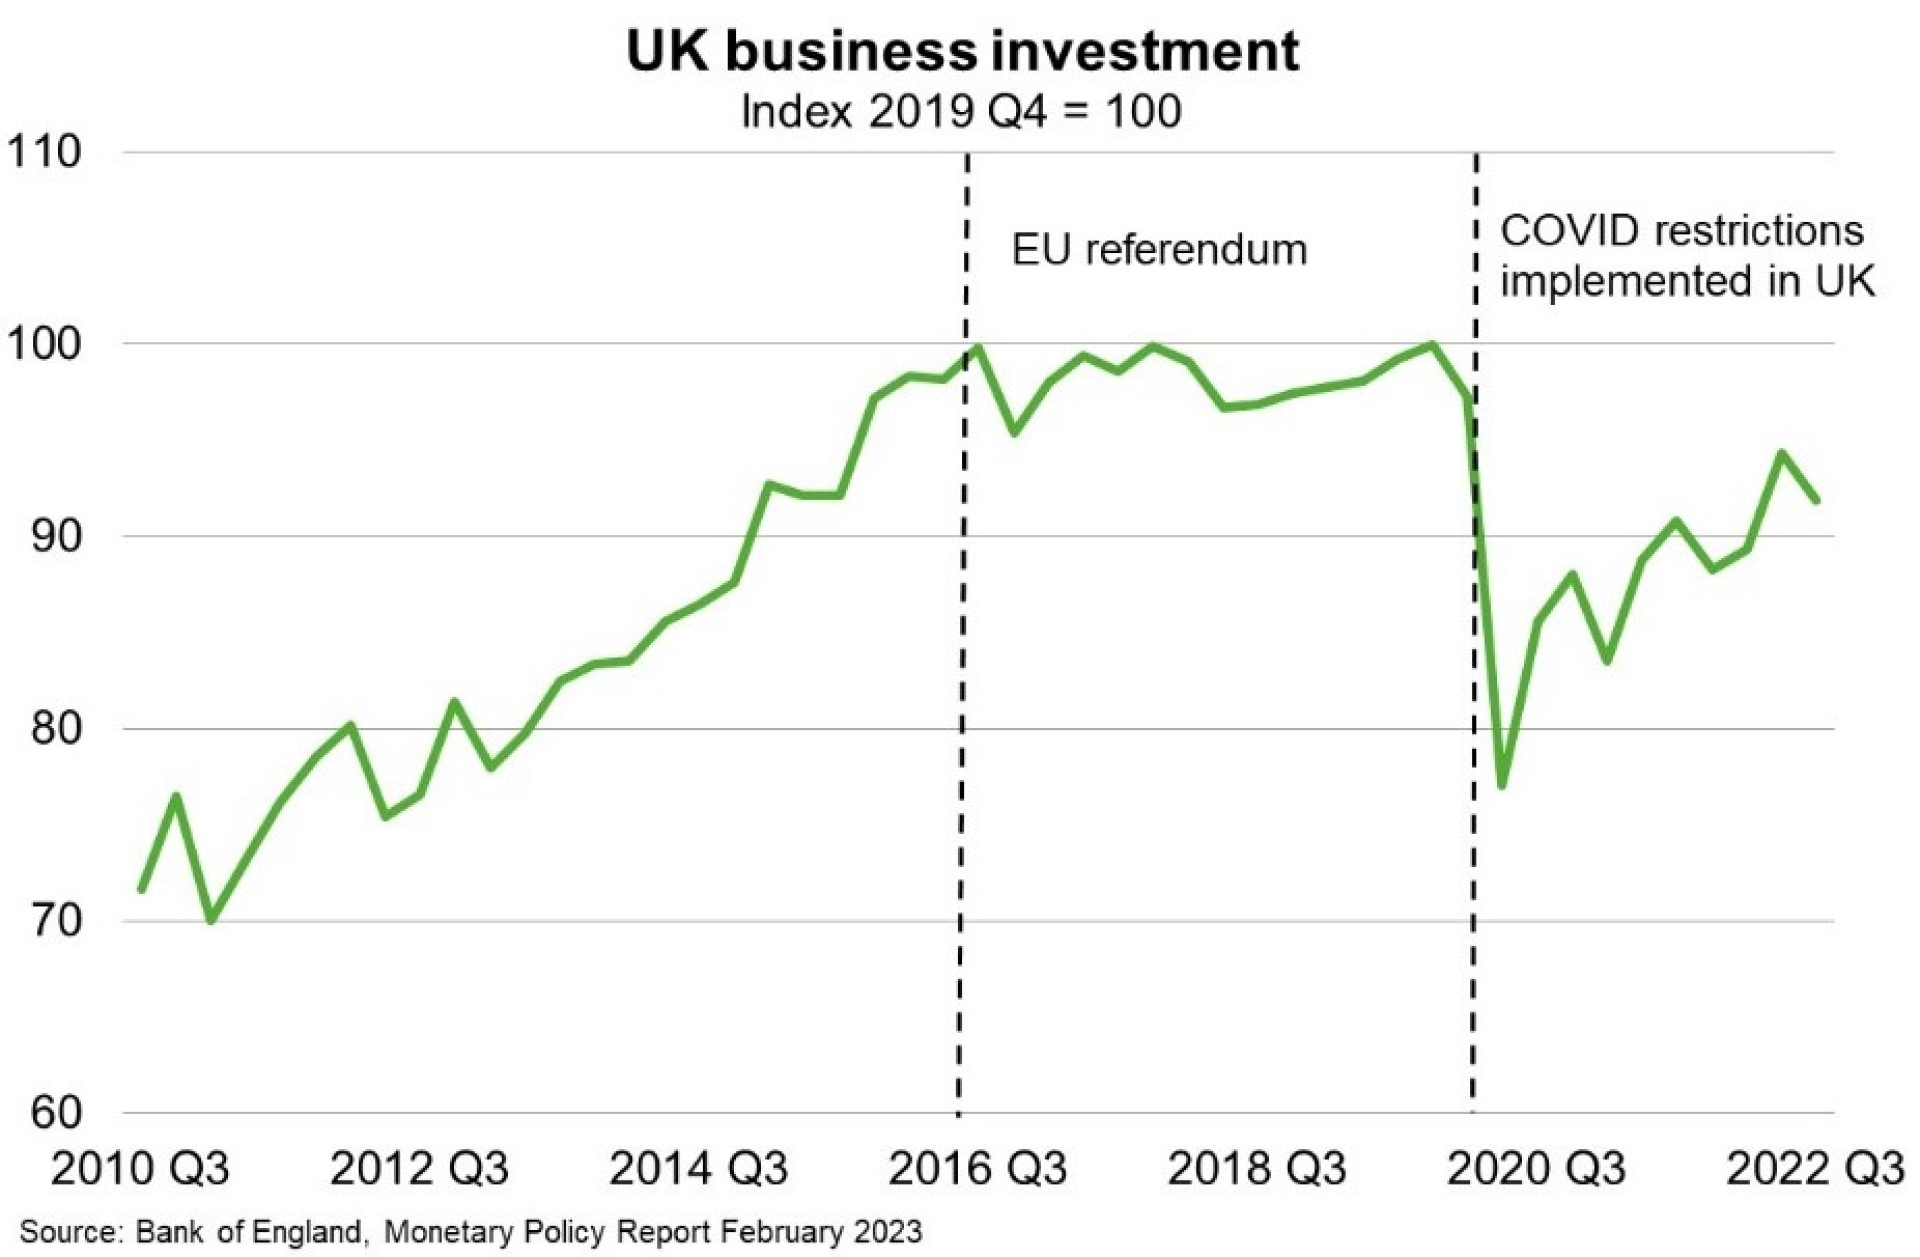 Following Brexit, higher barriers to trade and lower growth in capital spending, alongside the pandemic and energy crisis are all weighing on UK business investment. 